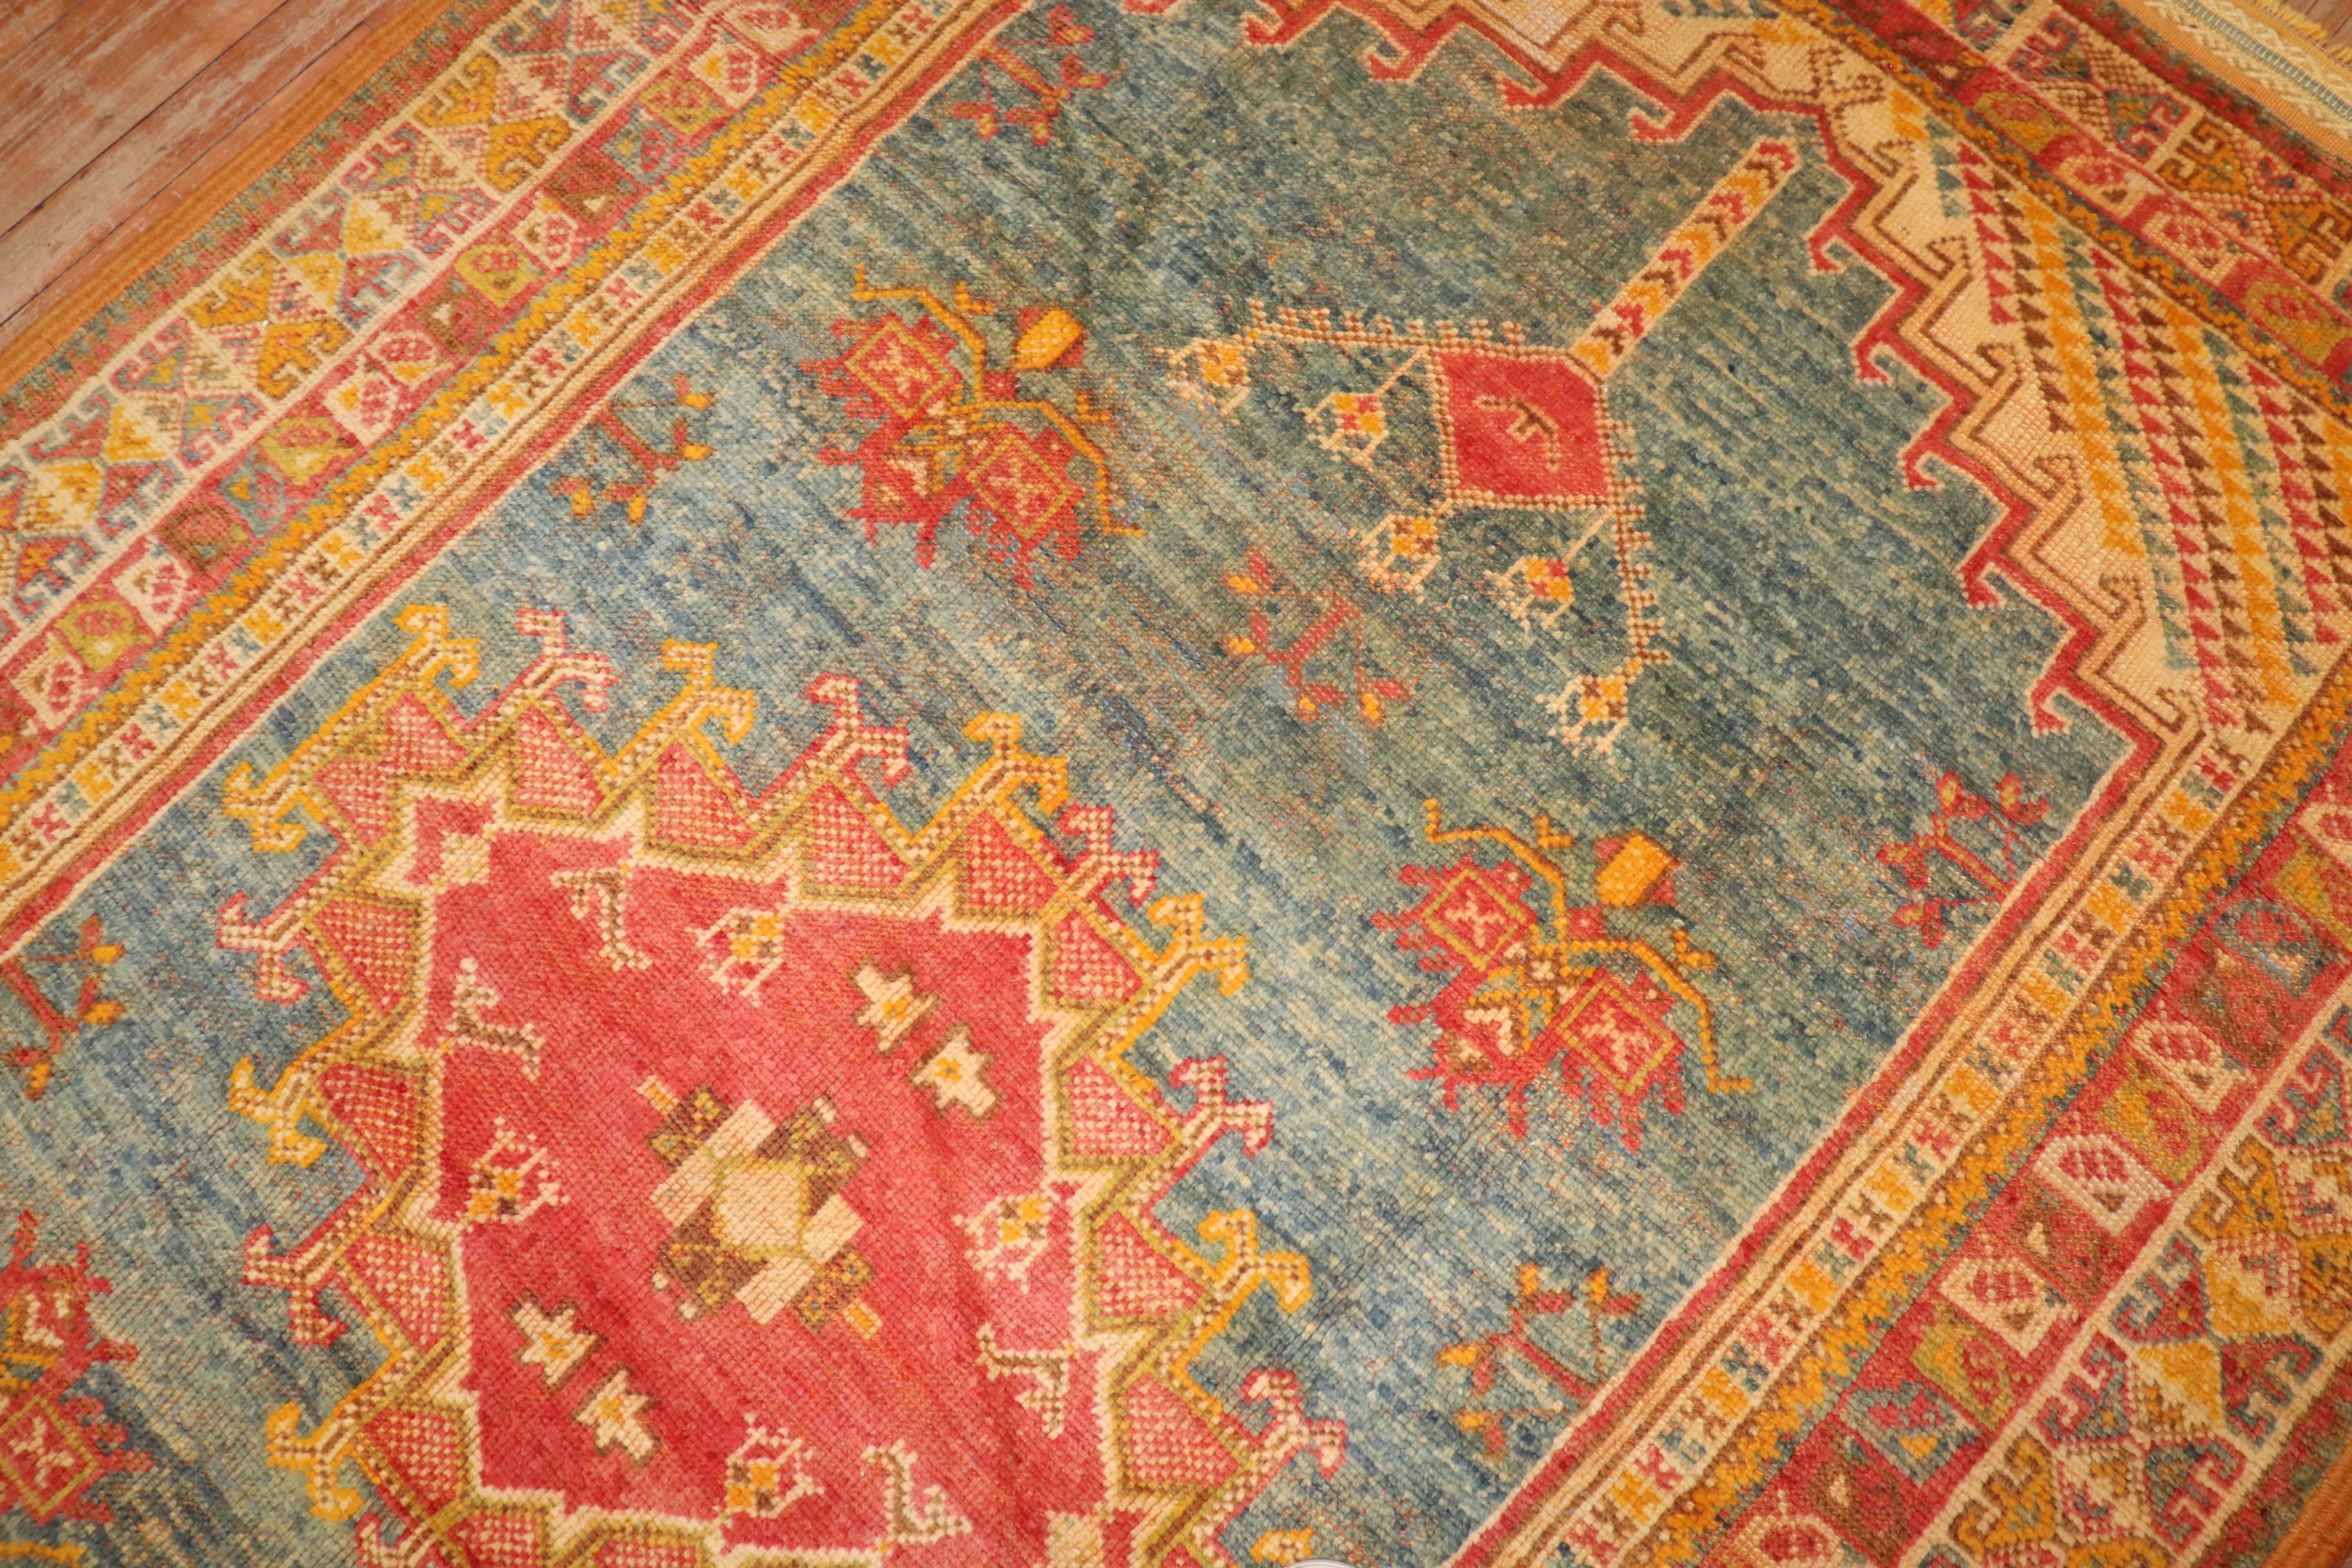 An intermediate size Vintage Moroccan rug from the 3rd quarter of the 20th century

Measures: 4'5'' x 6'1''.